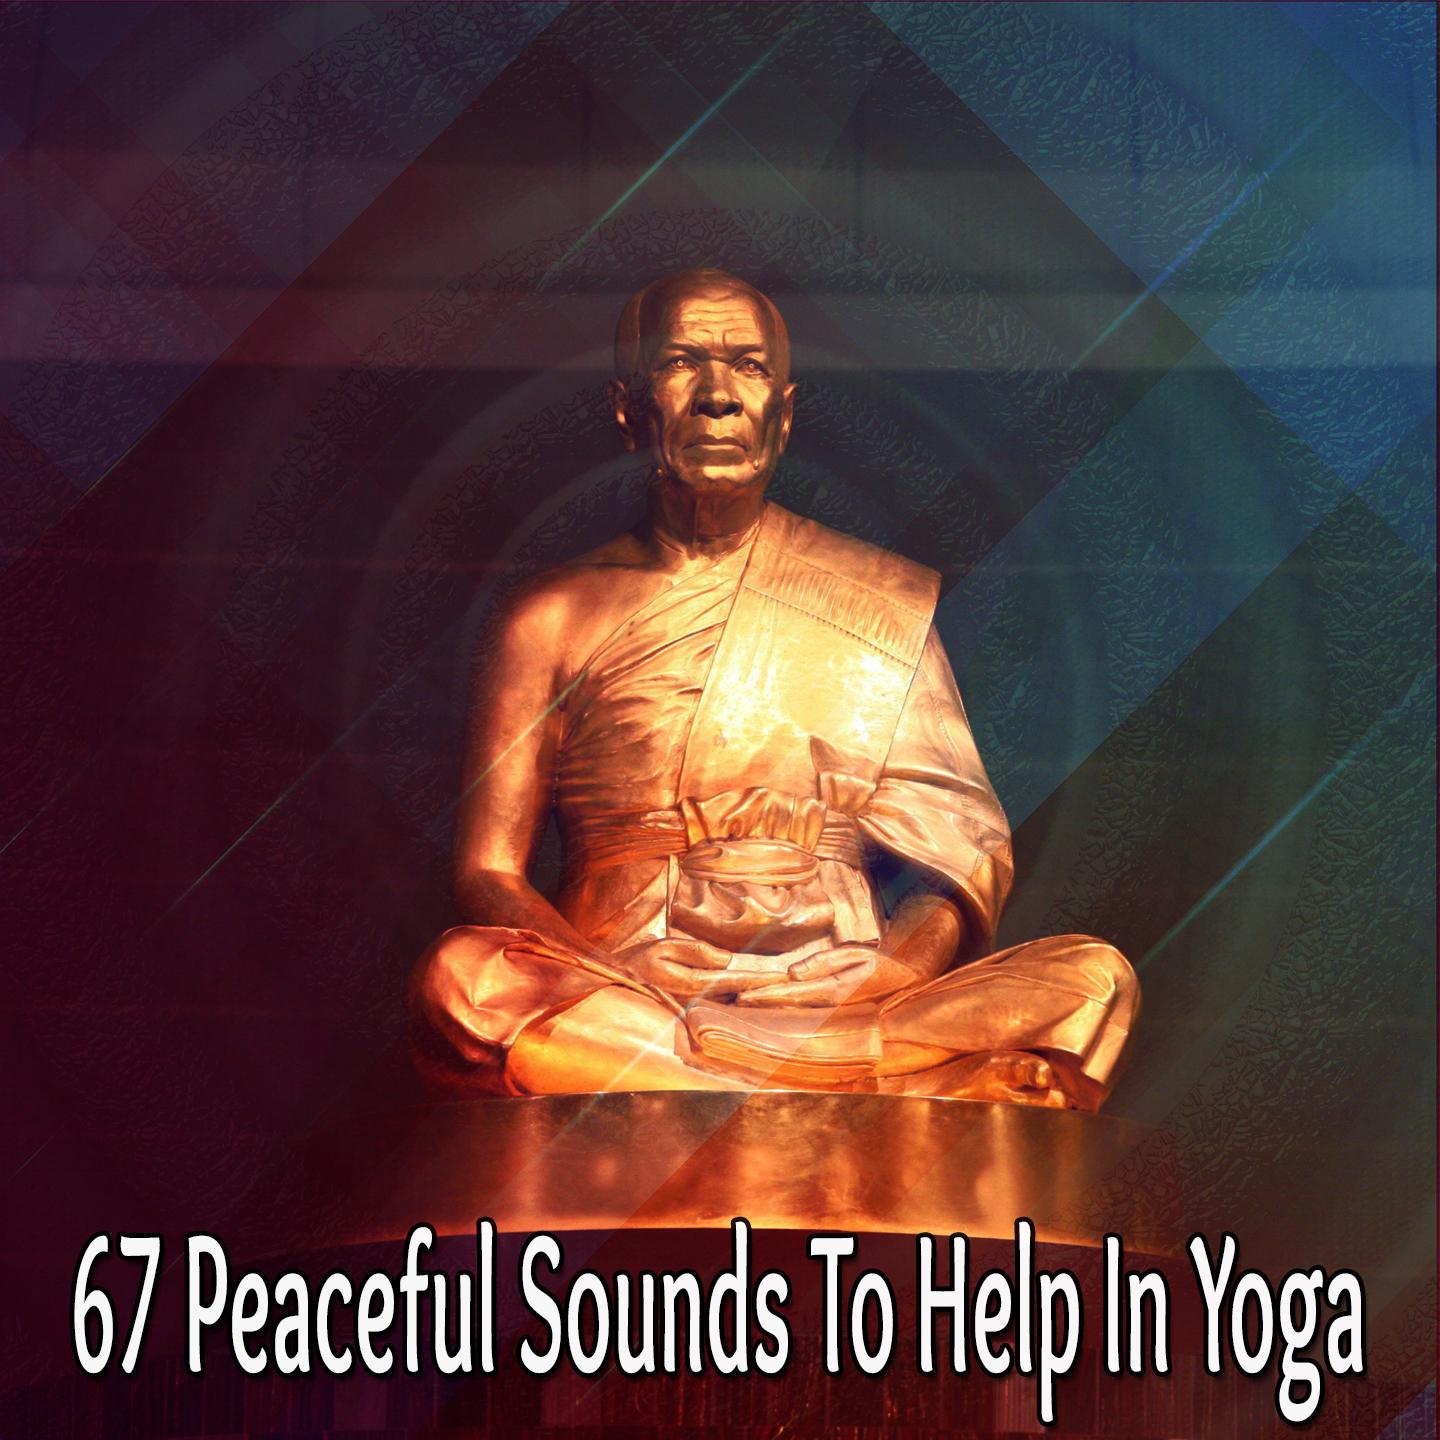 67 Peaceful Sounds to Help in Yoga